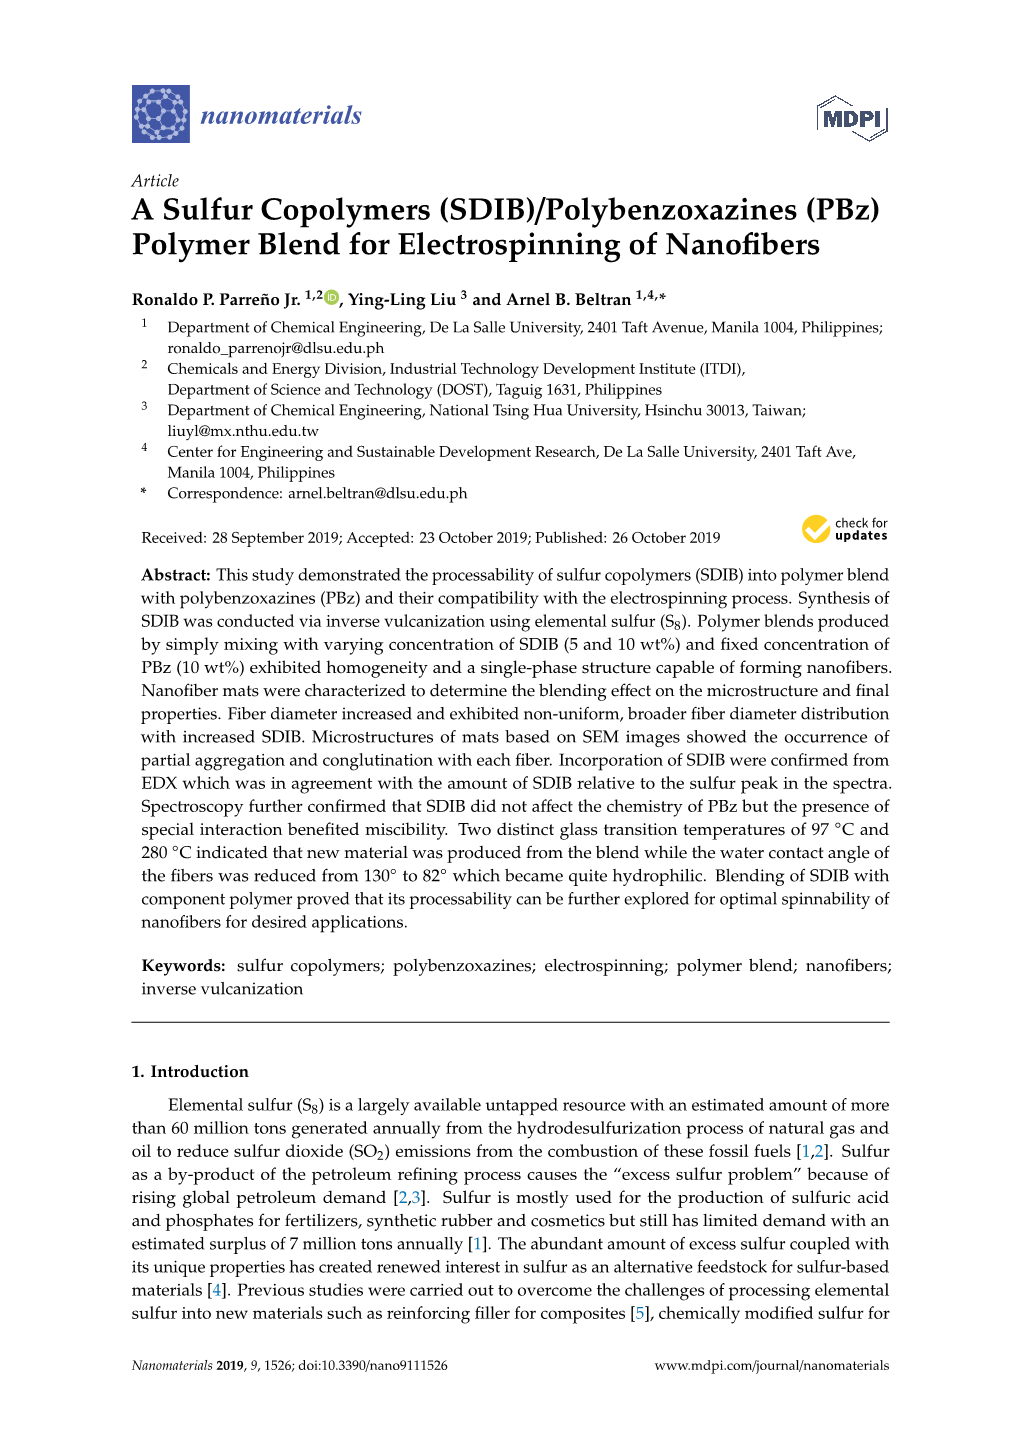 A Sulfur Copolymers (SDIB)/Polybenzoxazines (Pbz) Polymer Blend for Electrospinning of Nanoﬁbers